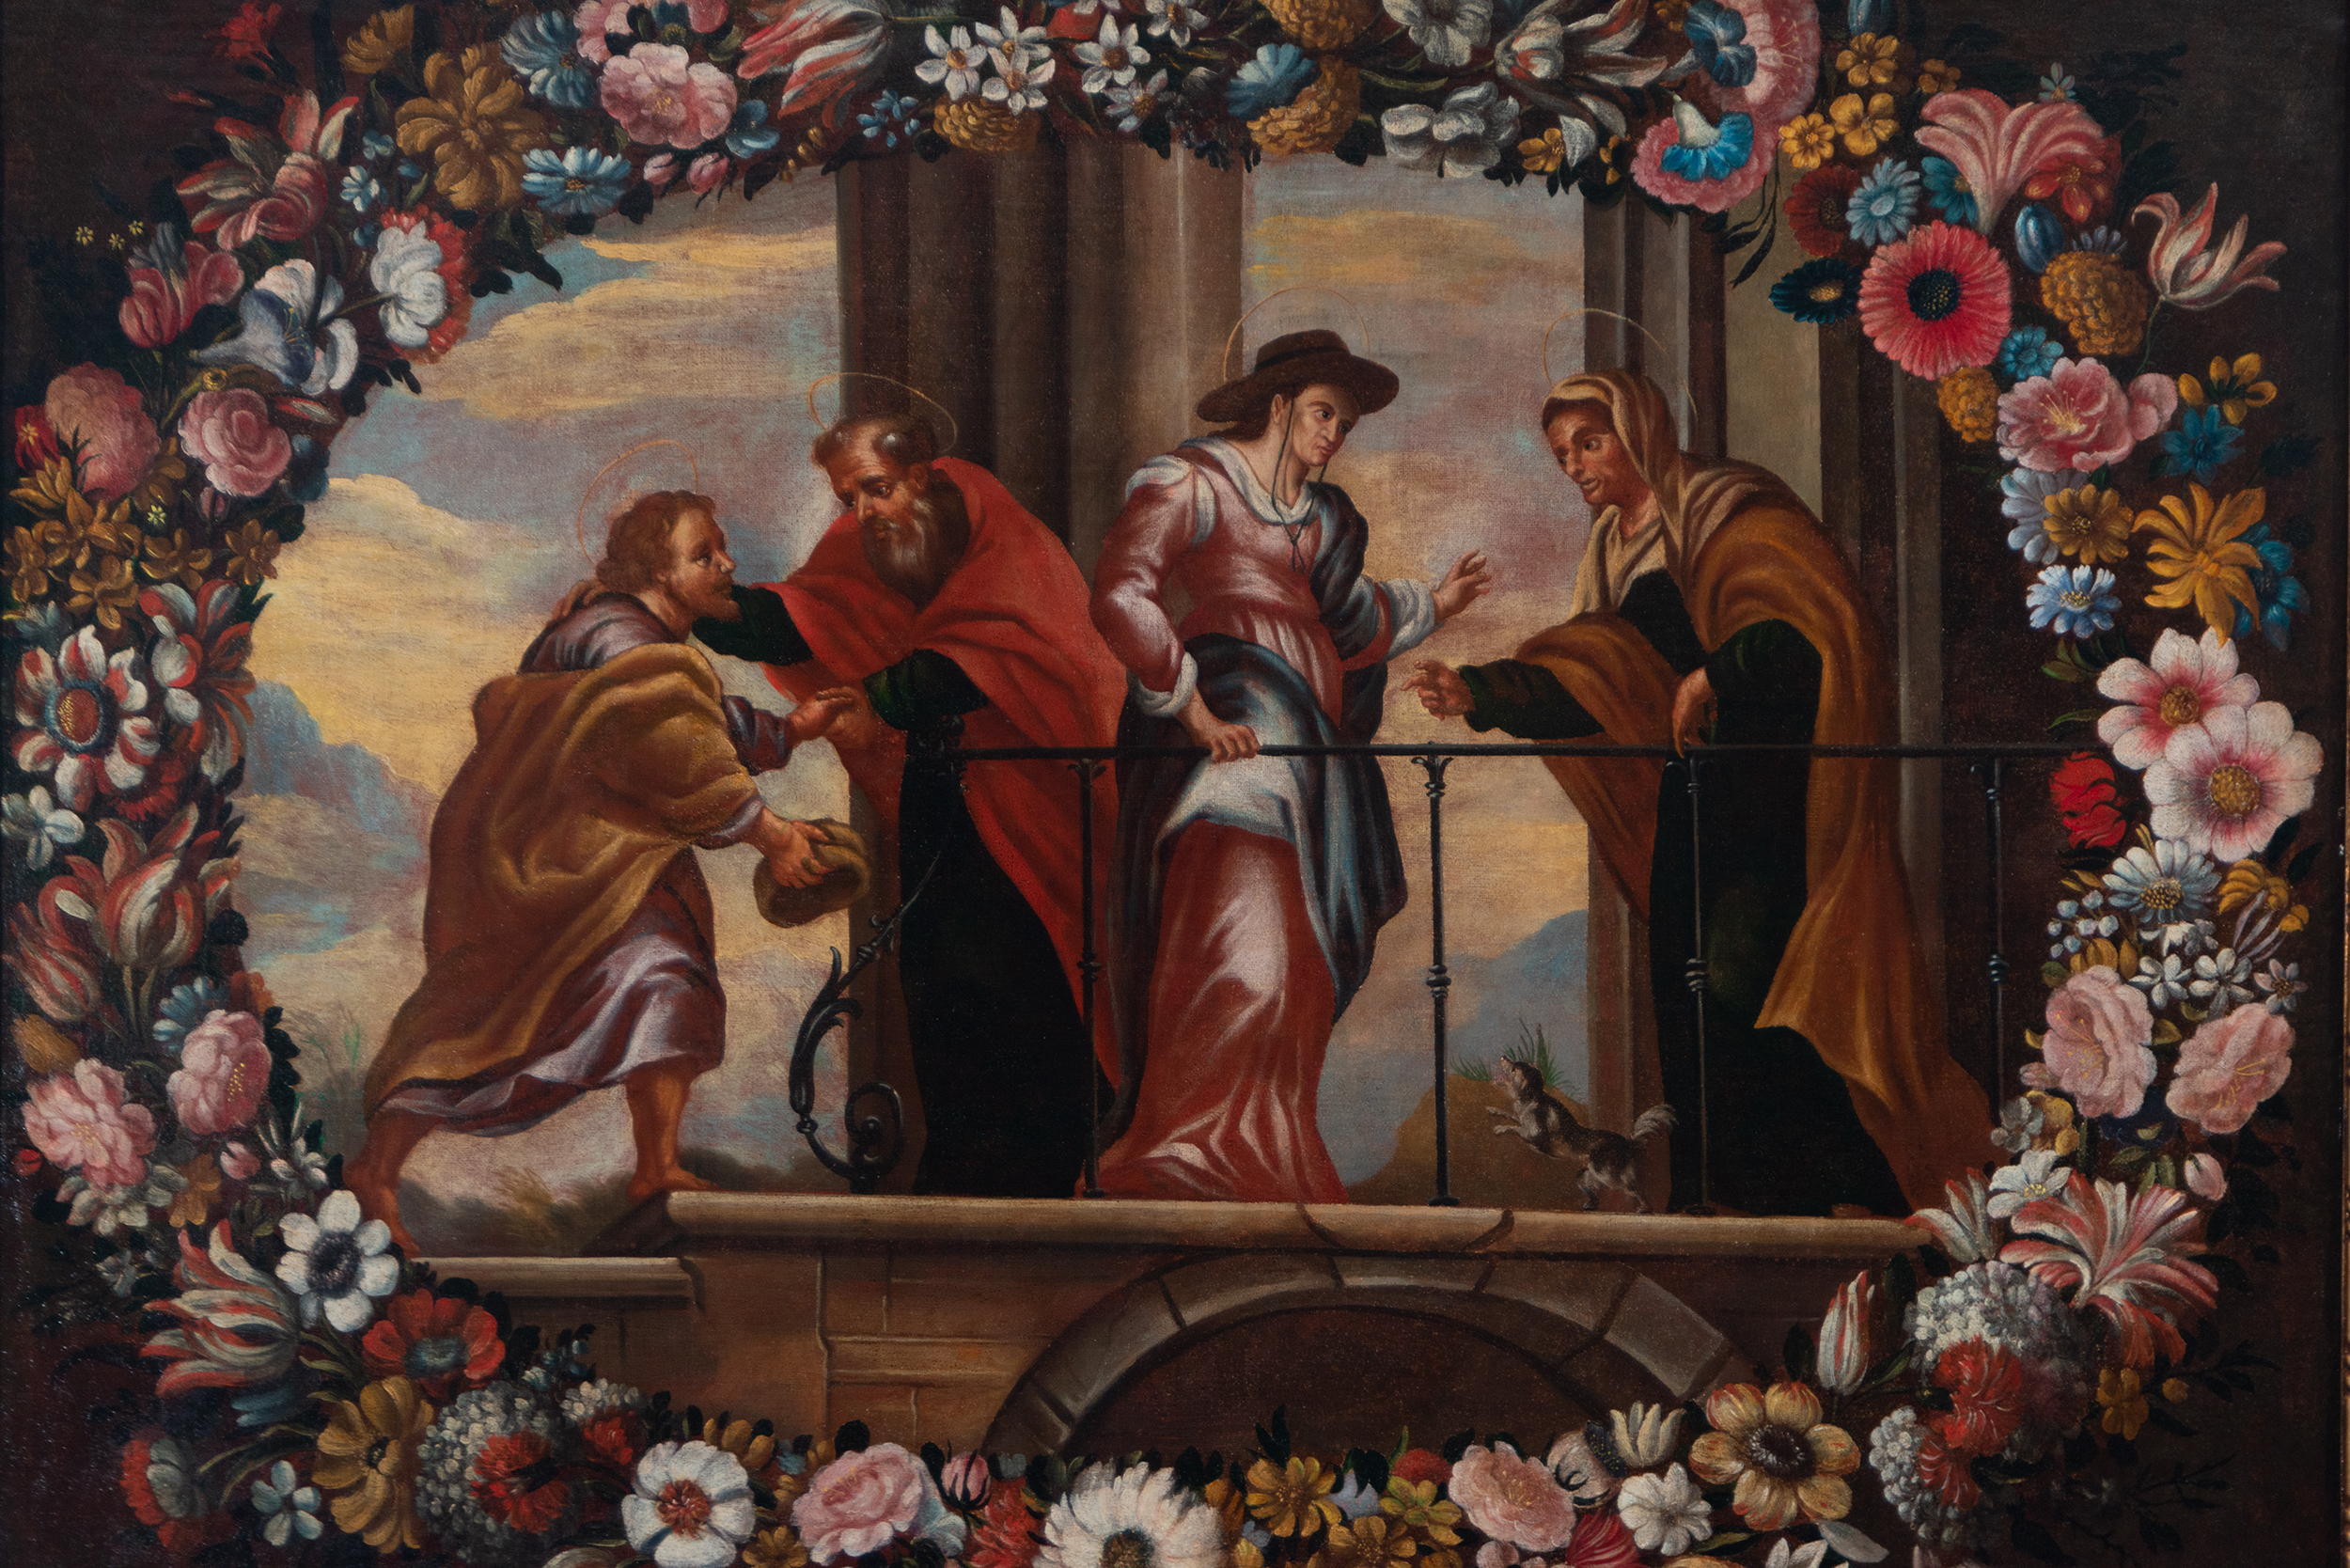 The Virgin and Saint Joseph together with Saint Anne and Saint Joaquin, following 17th-century Flemi - Image 2 of 6